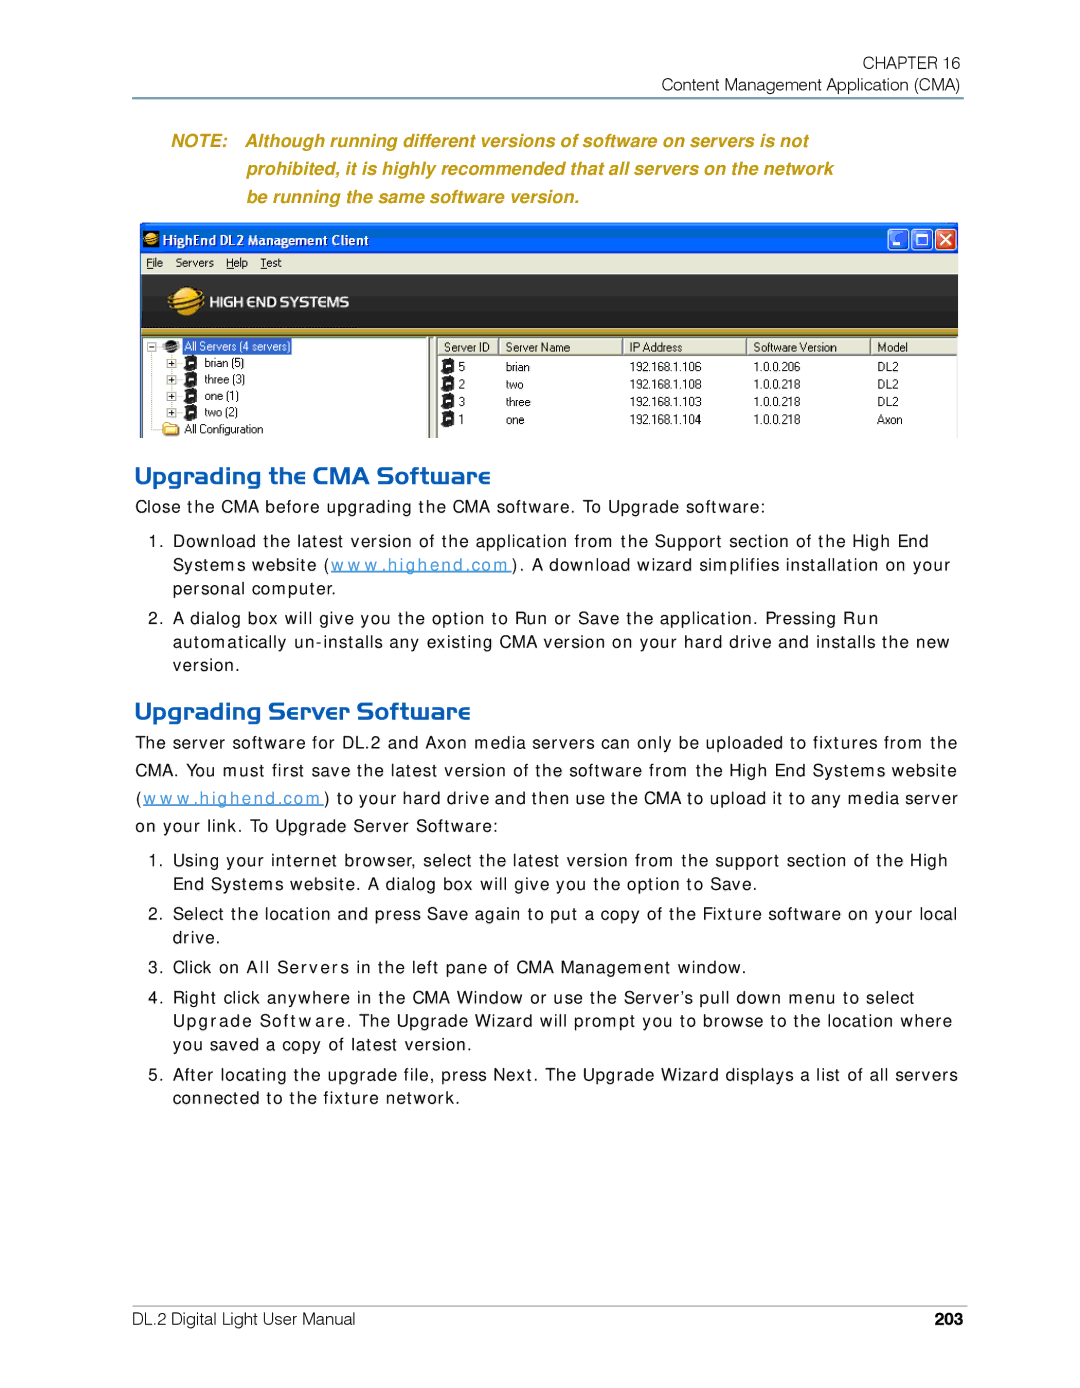 High End Systems DL.2 user manual Upgrading the CMA Software, Upgrading Server Software, 203 